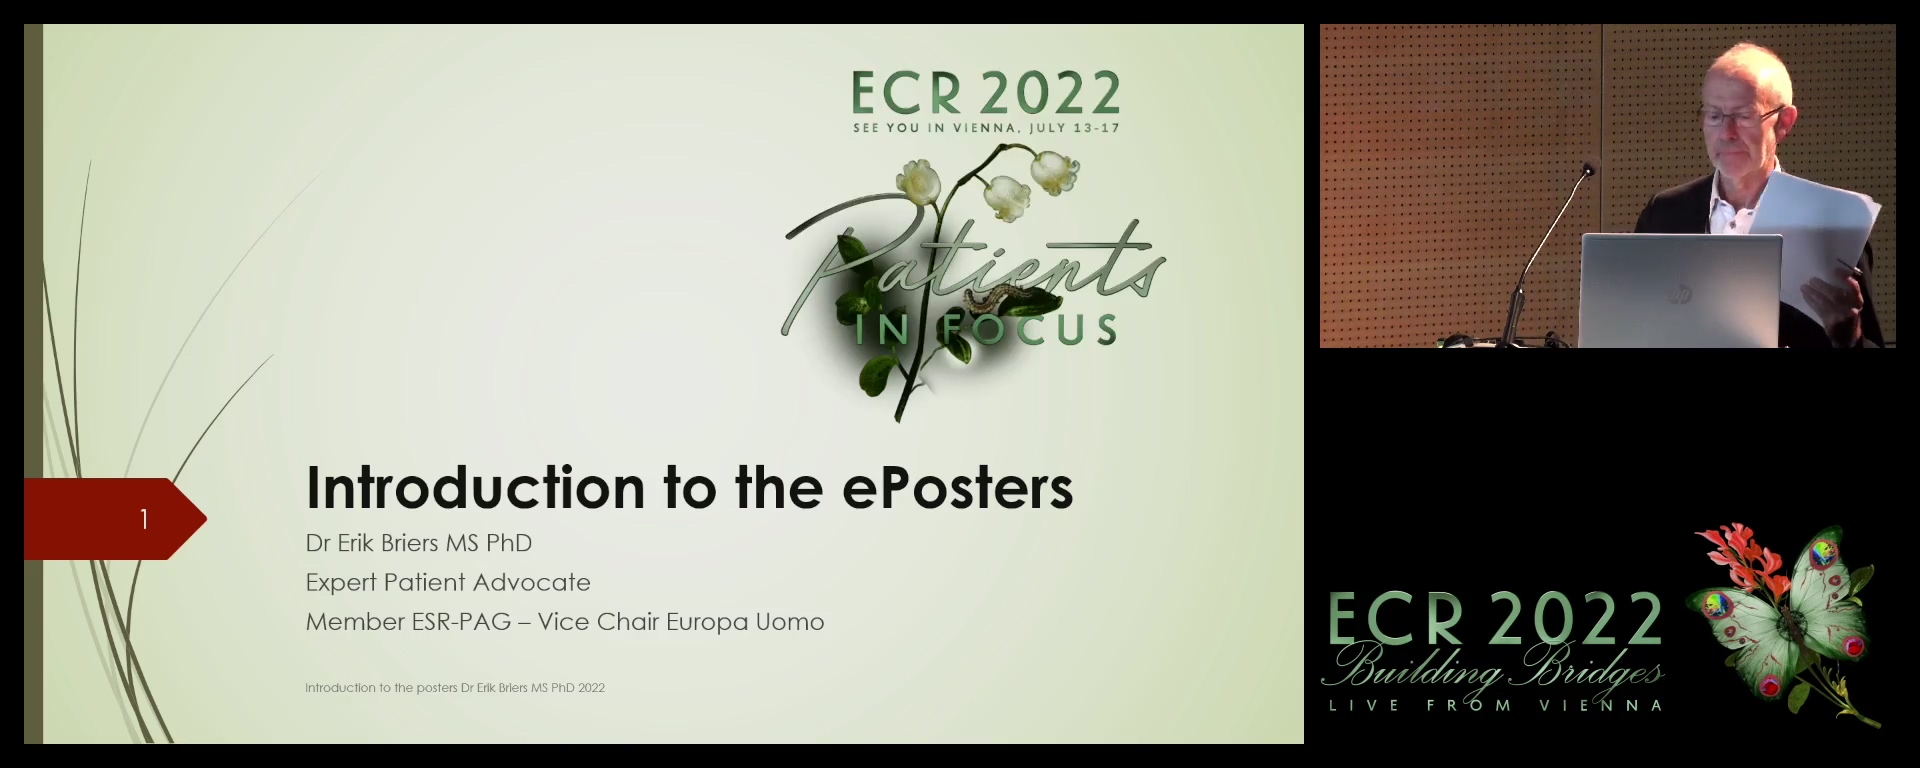 Introduction to the Patient in Focus posters - Erik Briers, Hasselt / BE